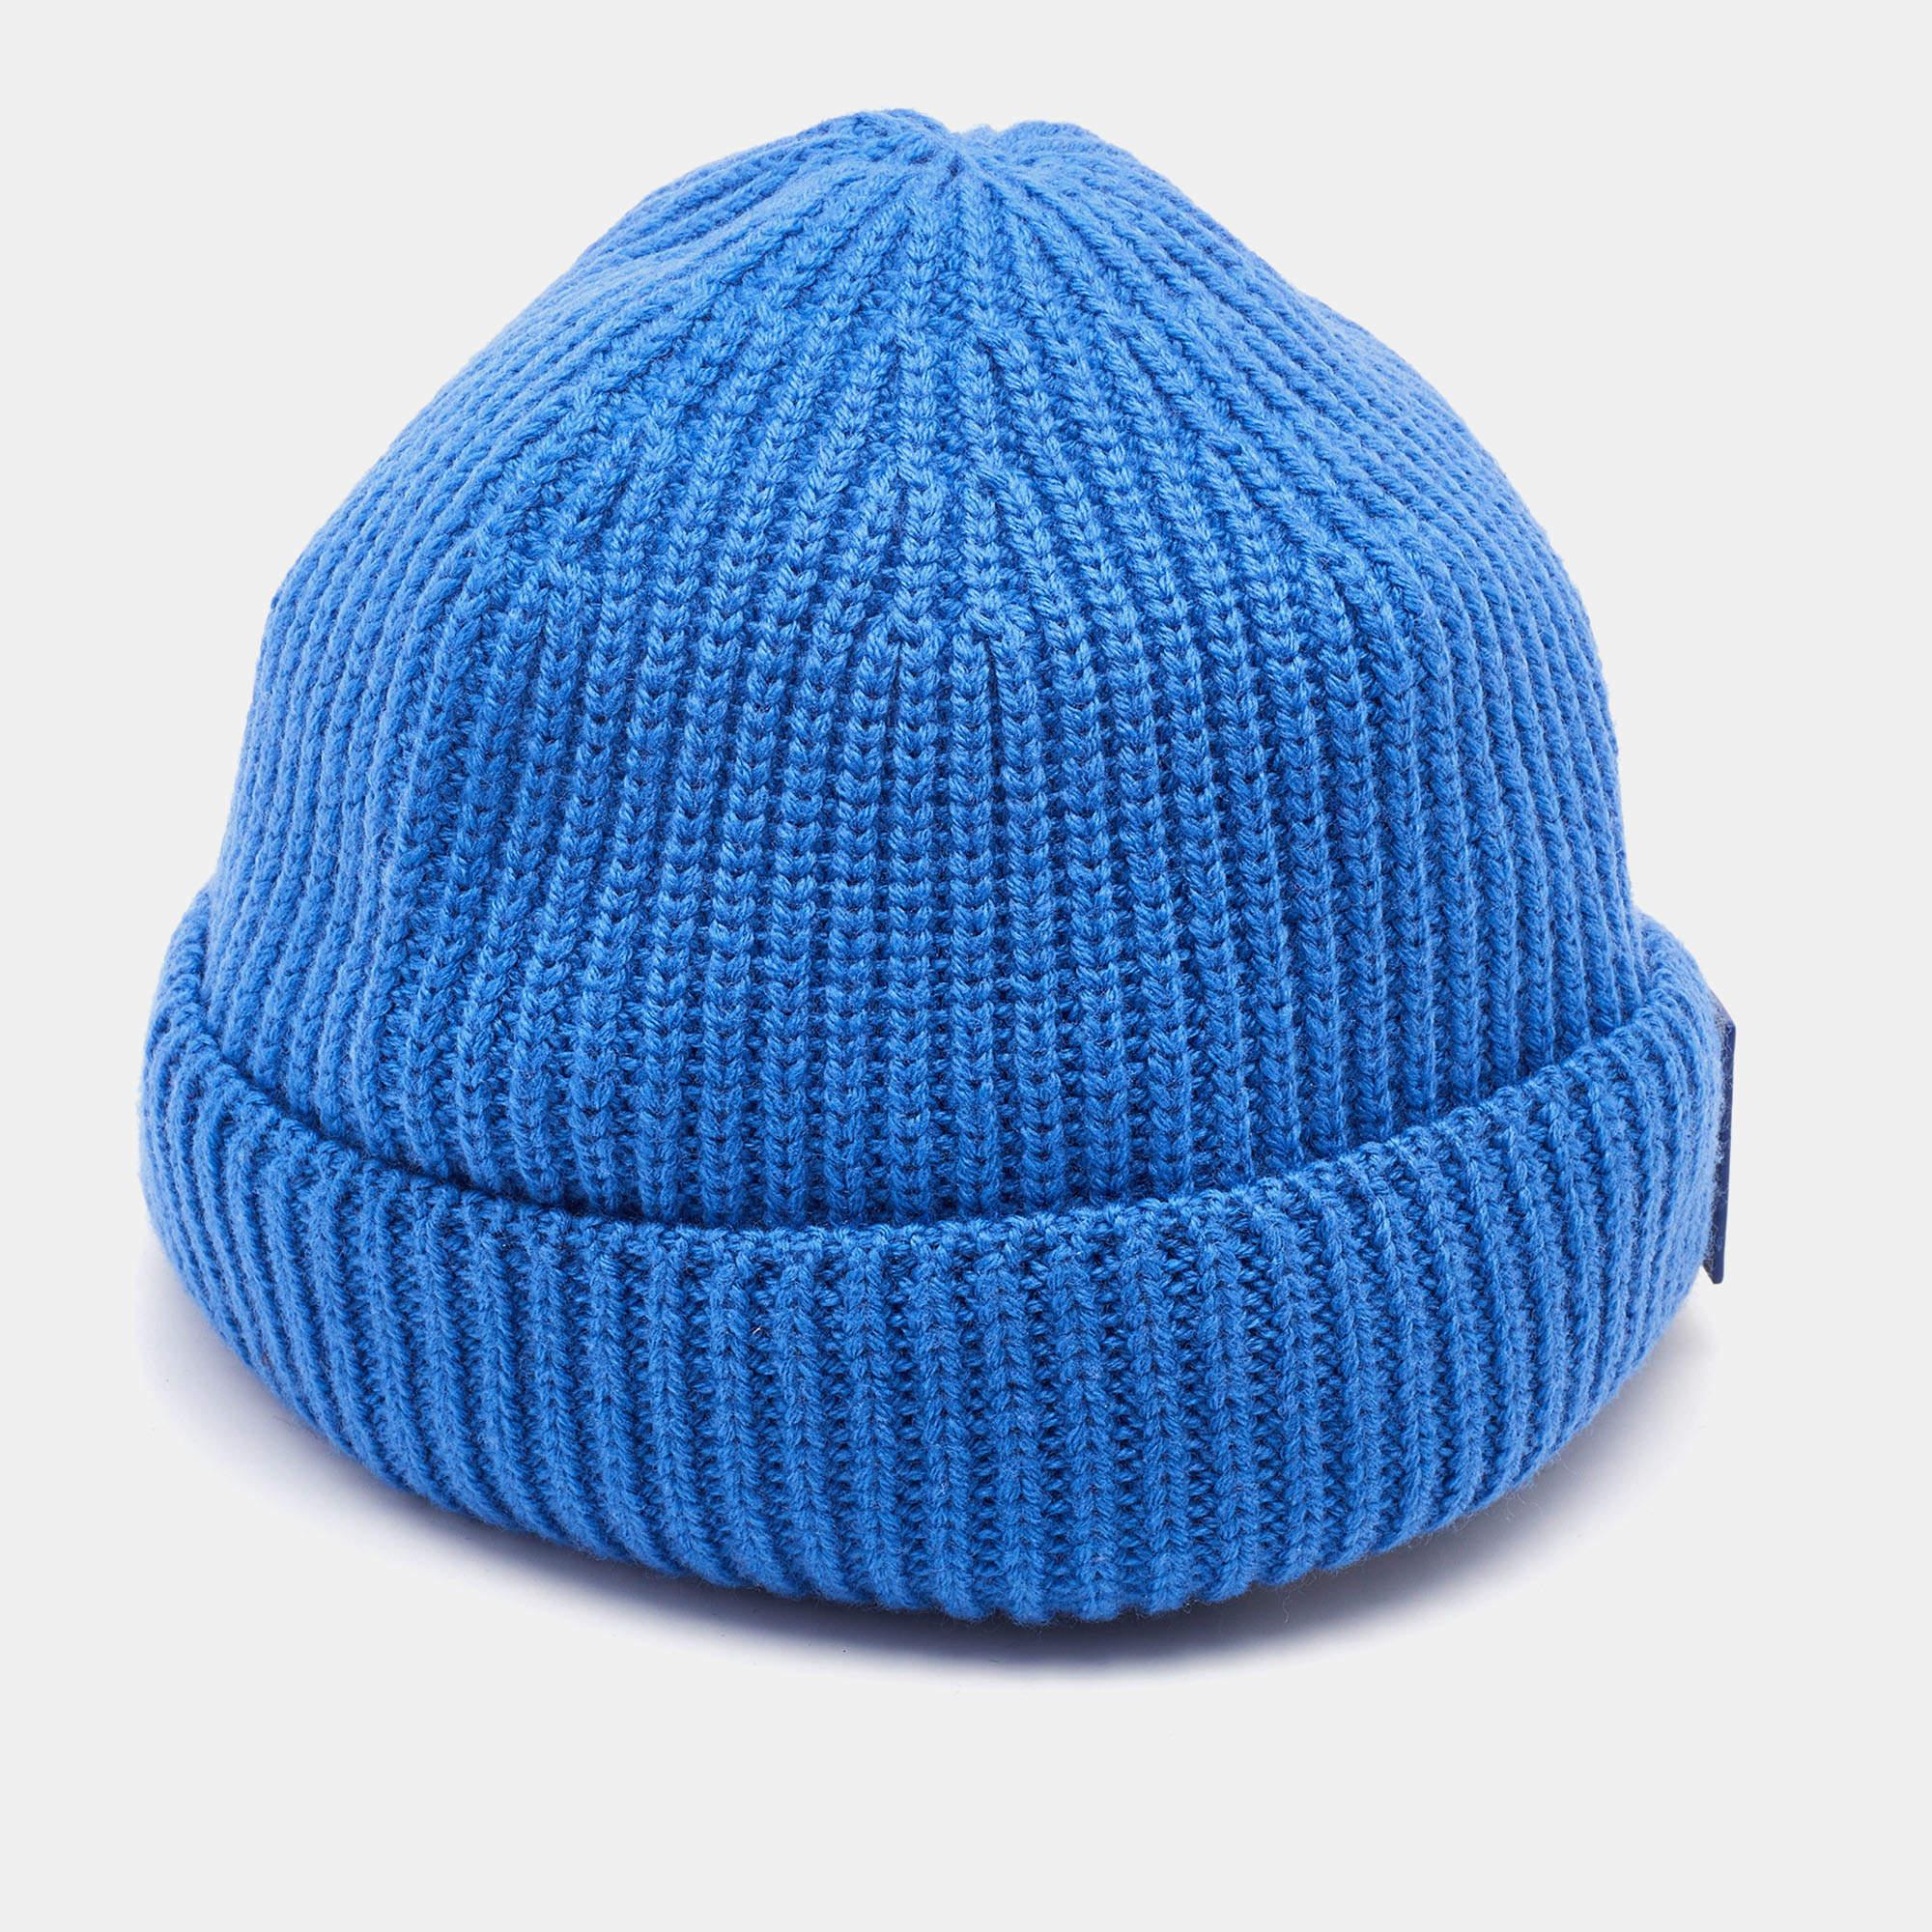 Embrace a chilly day with luxurious fashion by adding this LV beanie while you step out. It is knit from wool and finished with a blue shade.

Includes: Brand Tag
